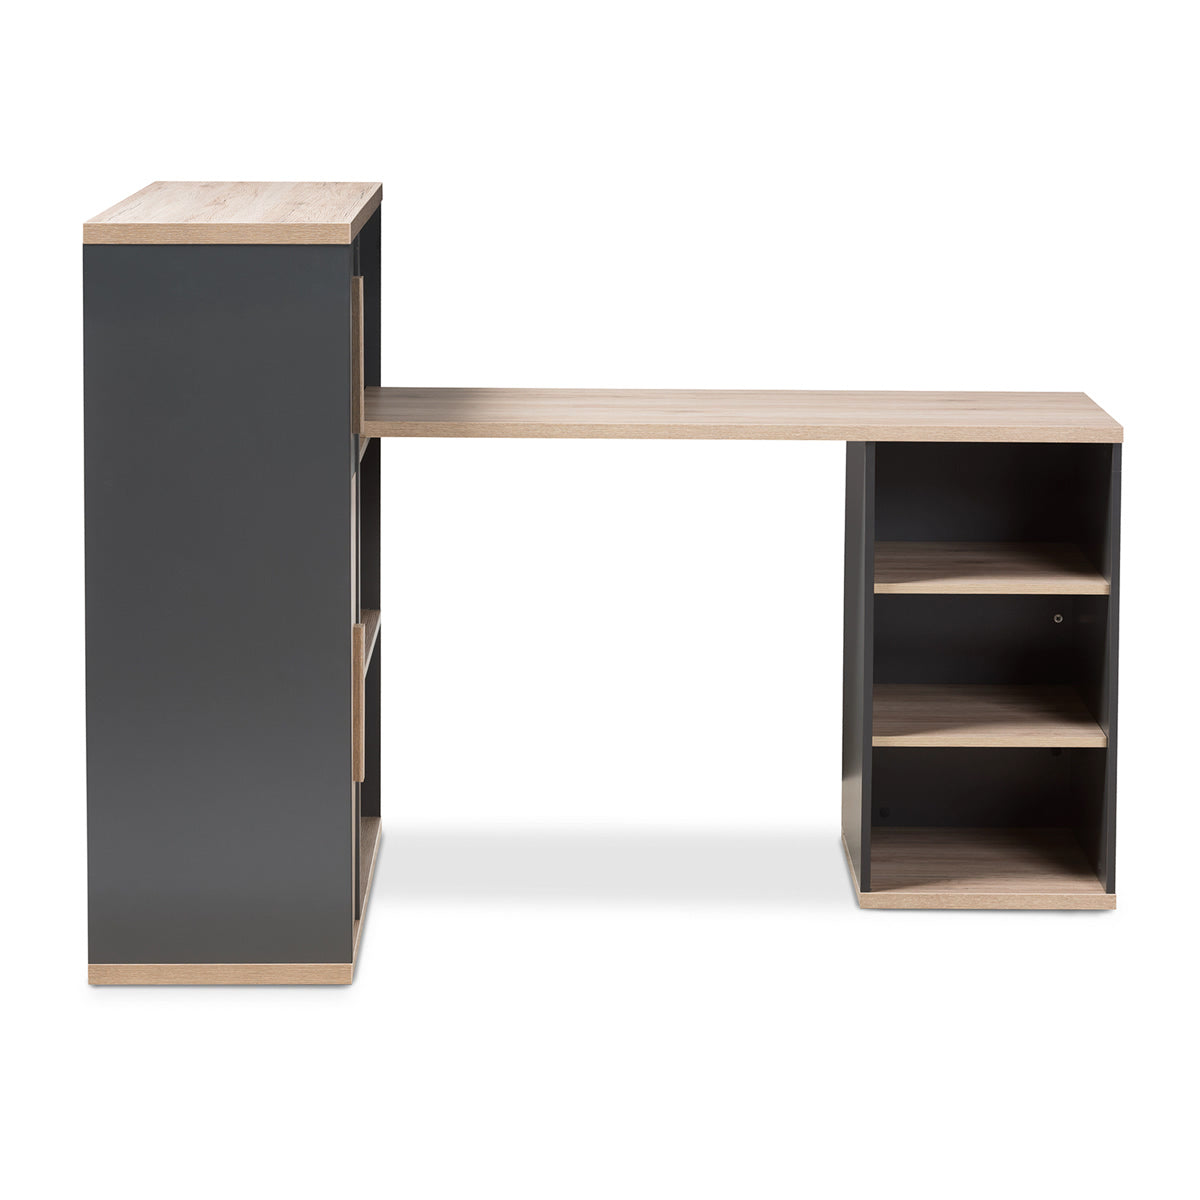 Baxton Studio Pandora Modern and Contemporary Dark Grey and Light Brown Two-Tone Study Desk with Built-in Shelving Unit Baxton Studio-Desks-Minimal And Modern - 2